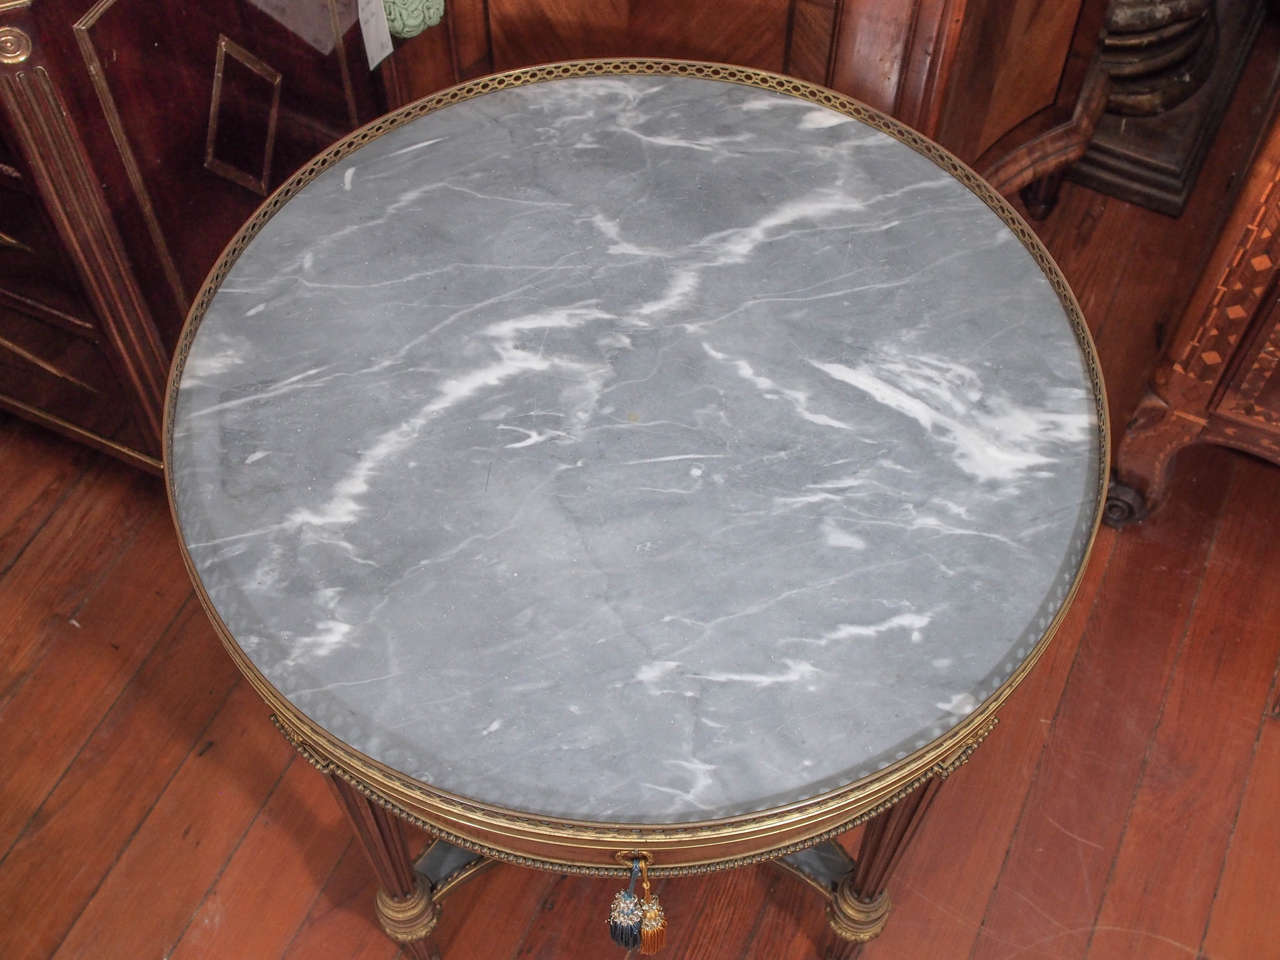 Louis XVI Bouillotte Table by Gervaise Durand, French